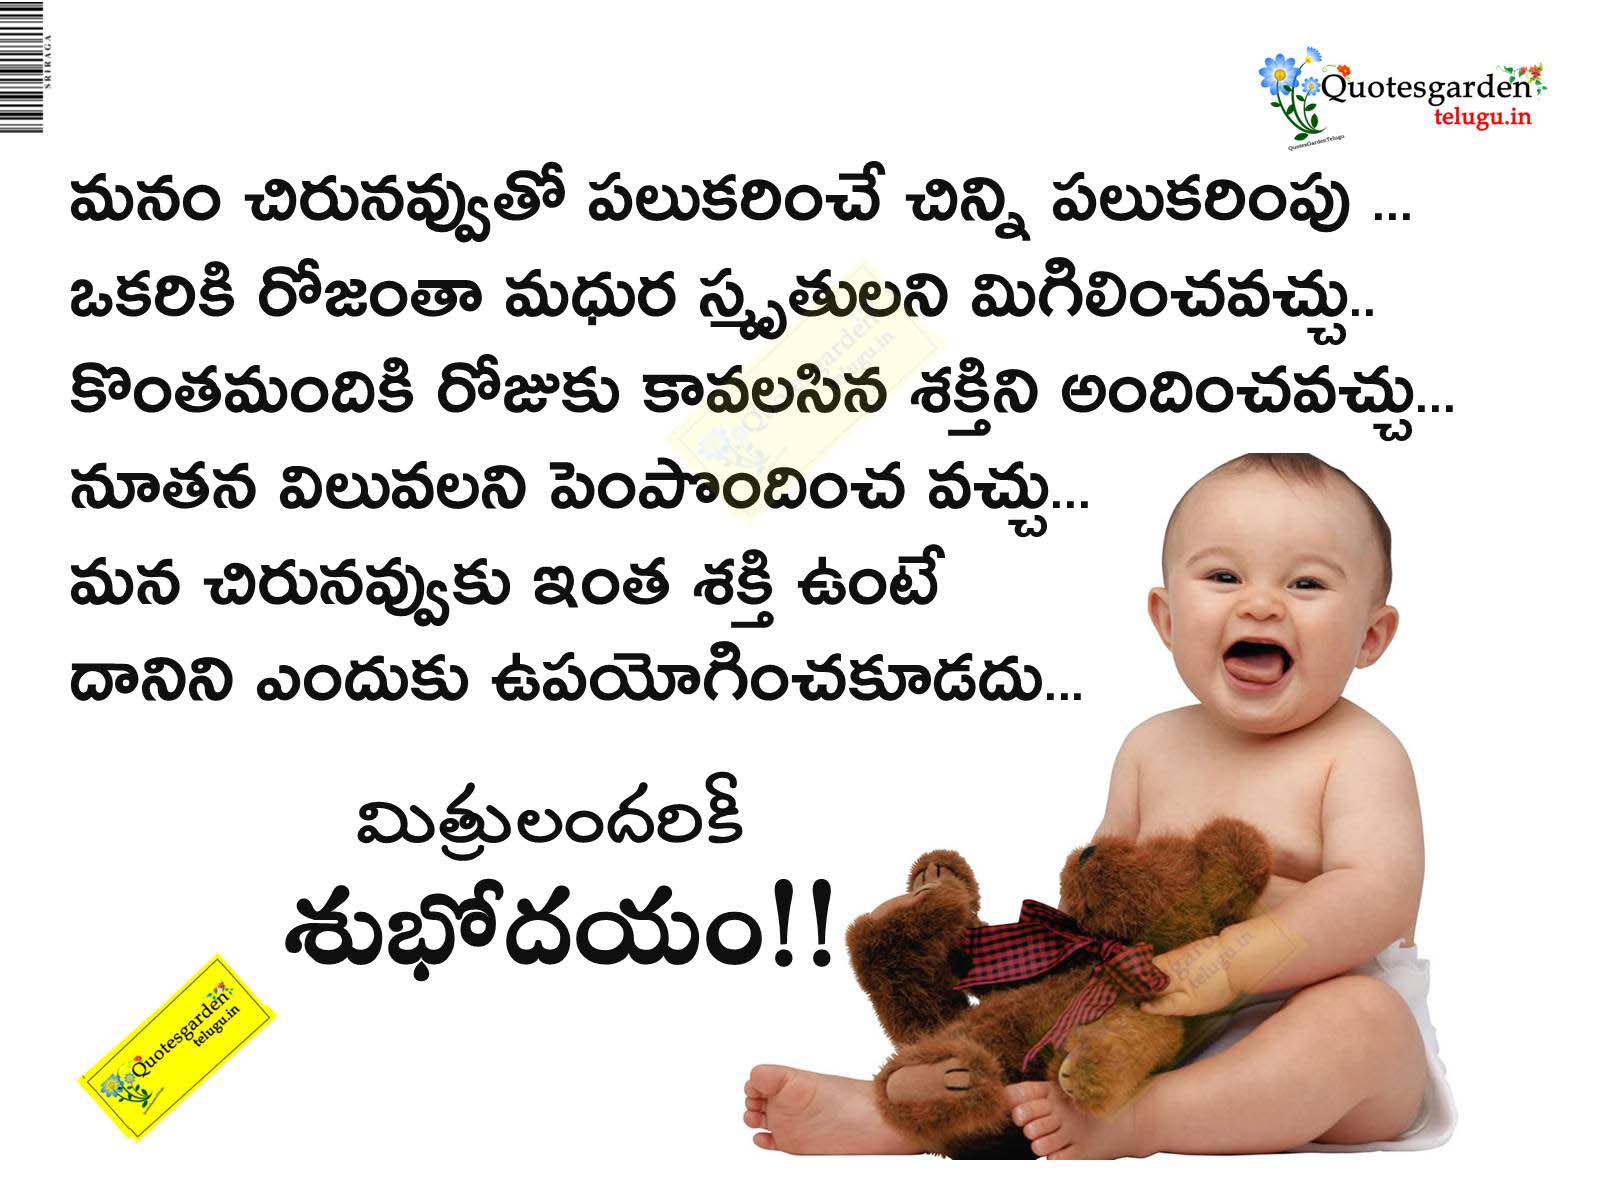 Telugu Successful Life Keep Smiling Quotes Images With Cute Baby Hd  Wallpapers | QUOTES GARDEN TELUGU | Telugu Quotes | English Quotes | Hindi  Quotes |